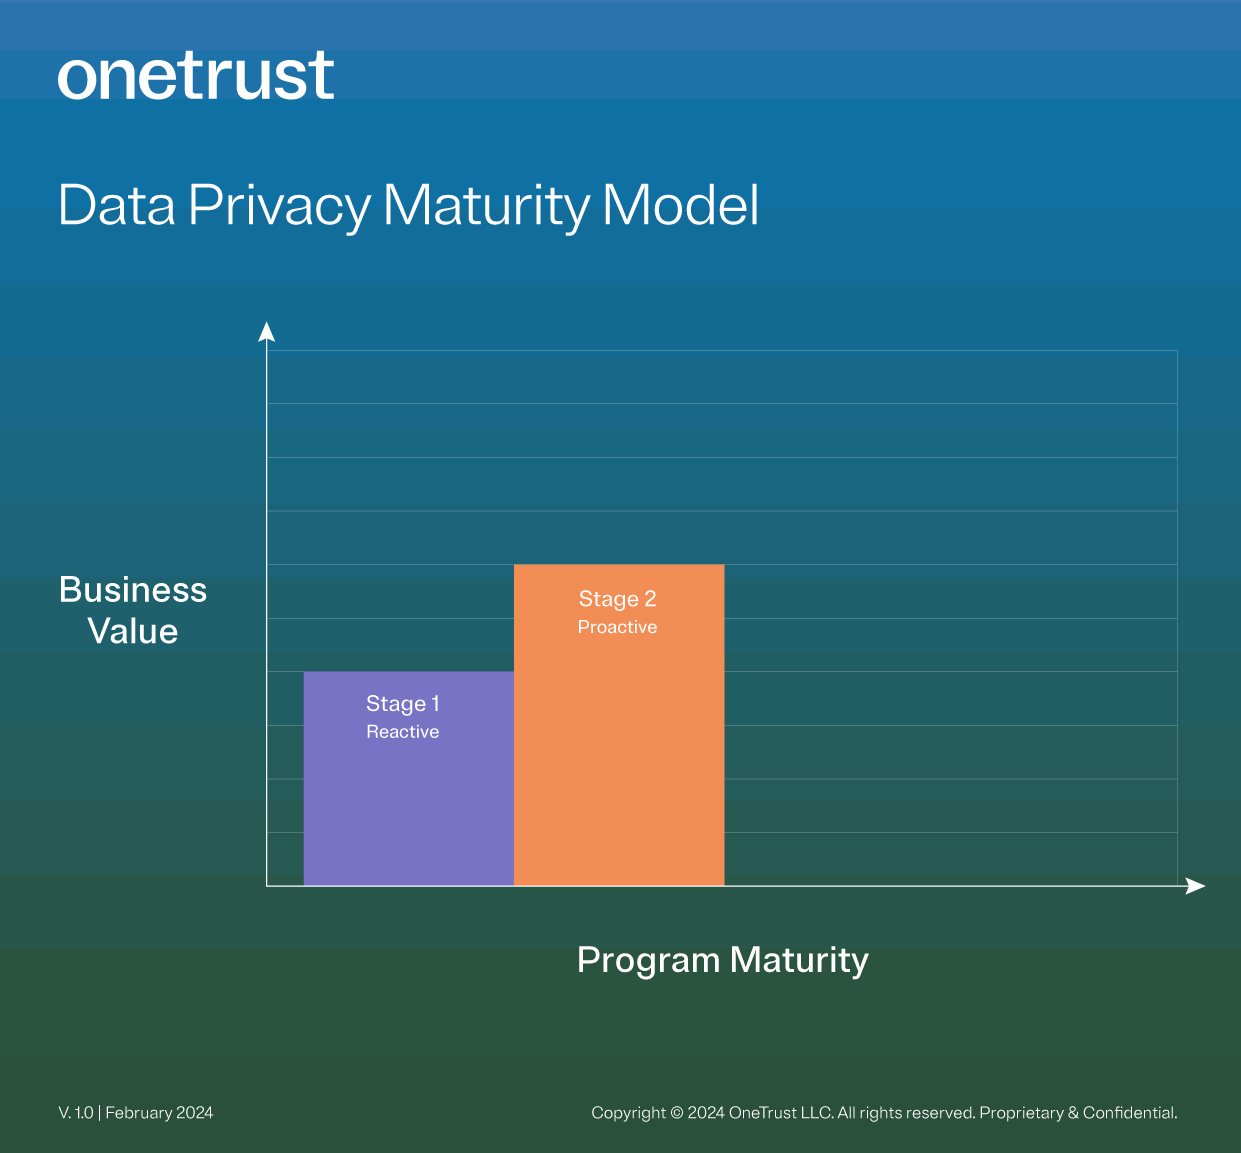 Bar graph showing the relationship between the first two maturity stages of a data privacy program and their business value.